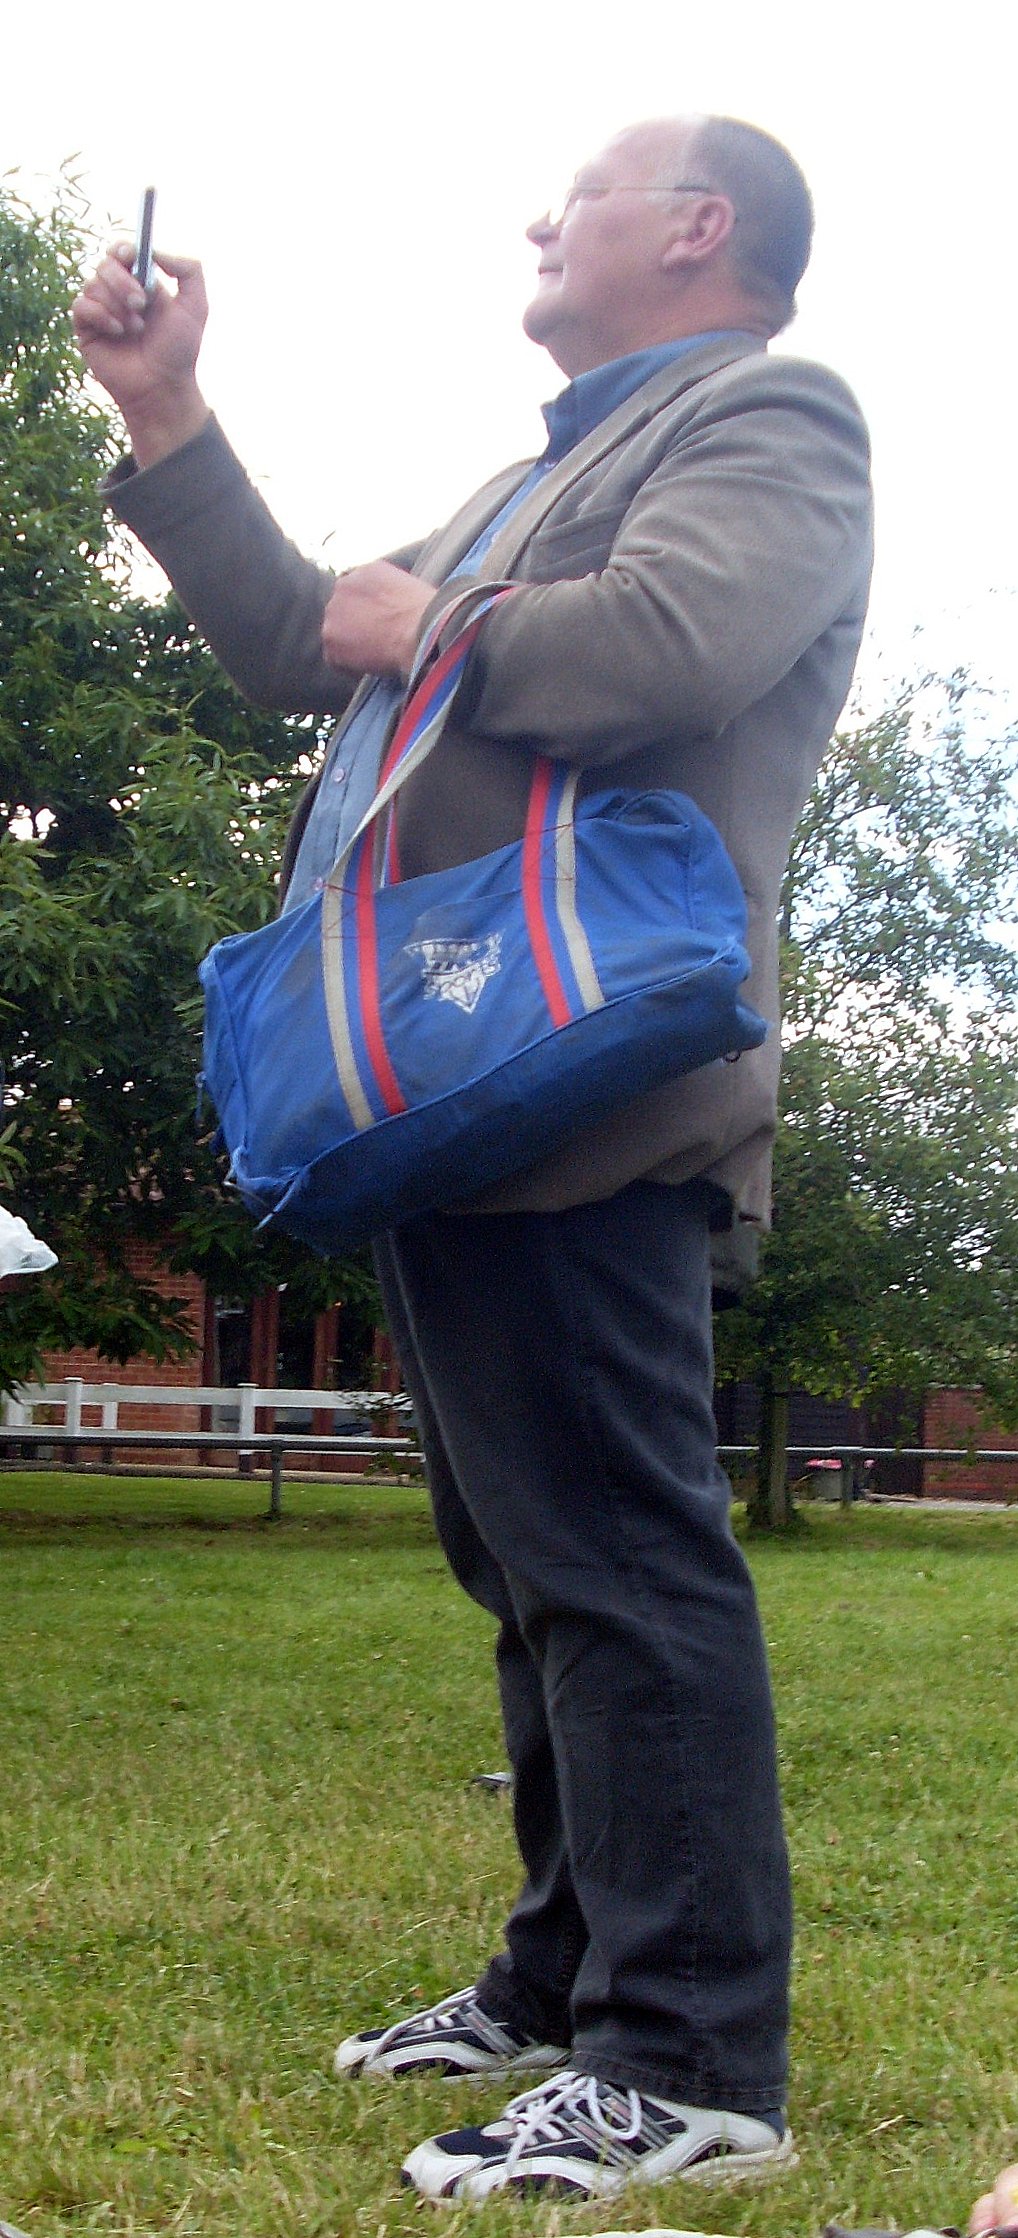 man standing in park smoking and holding blue bag